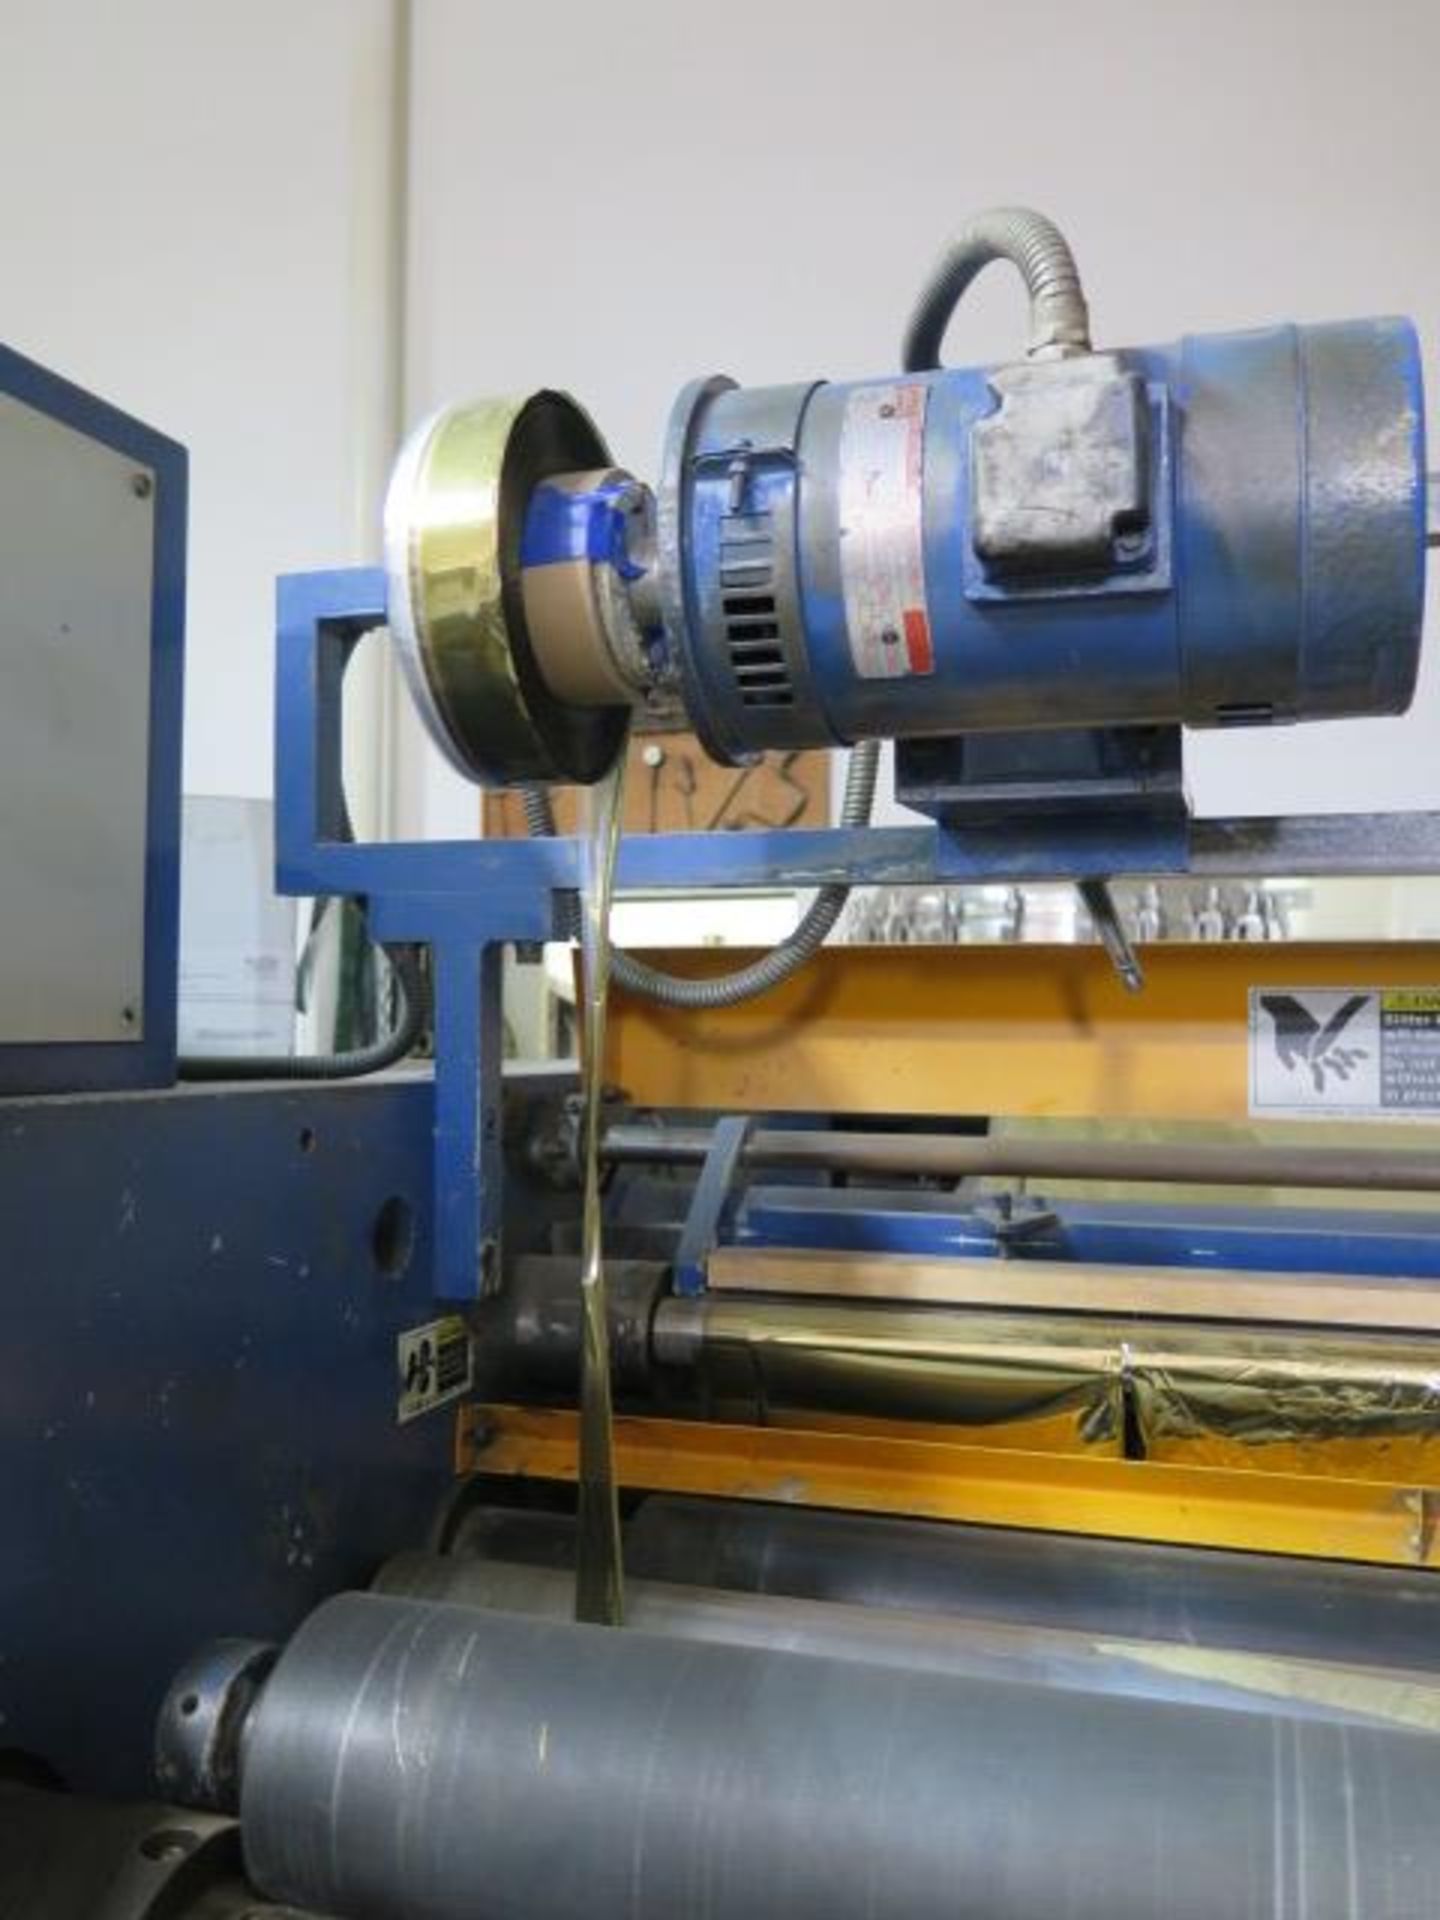 Alan Duffy Engineering 54" Web Slitter / Rewinder Label Foil Converting Machine SOLD AS IS - Image 15 of 16